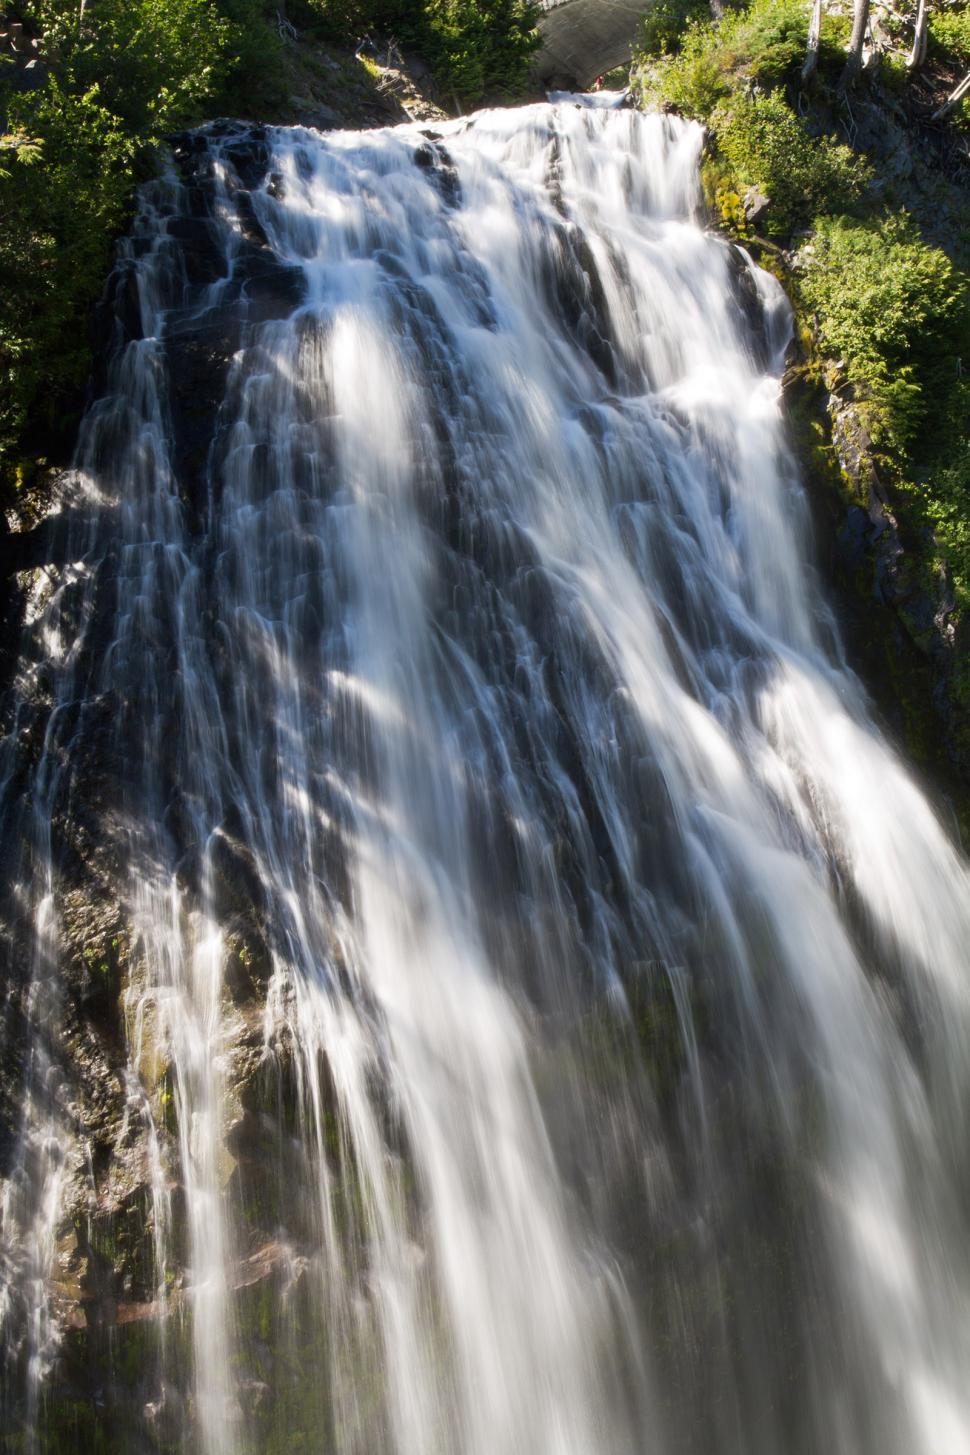 Free Image of Waterfalls in Mount Rainer National Park 